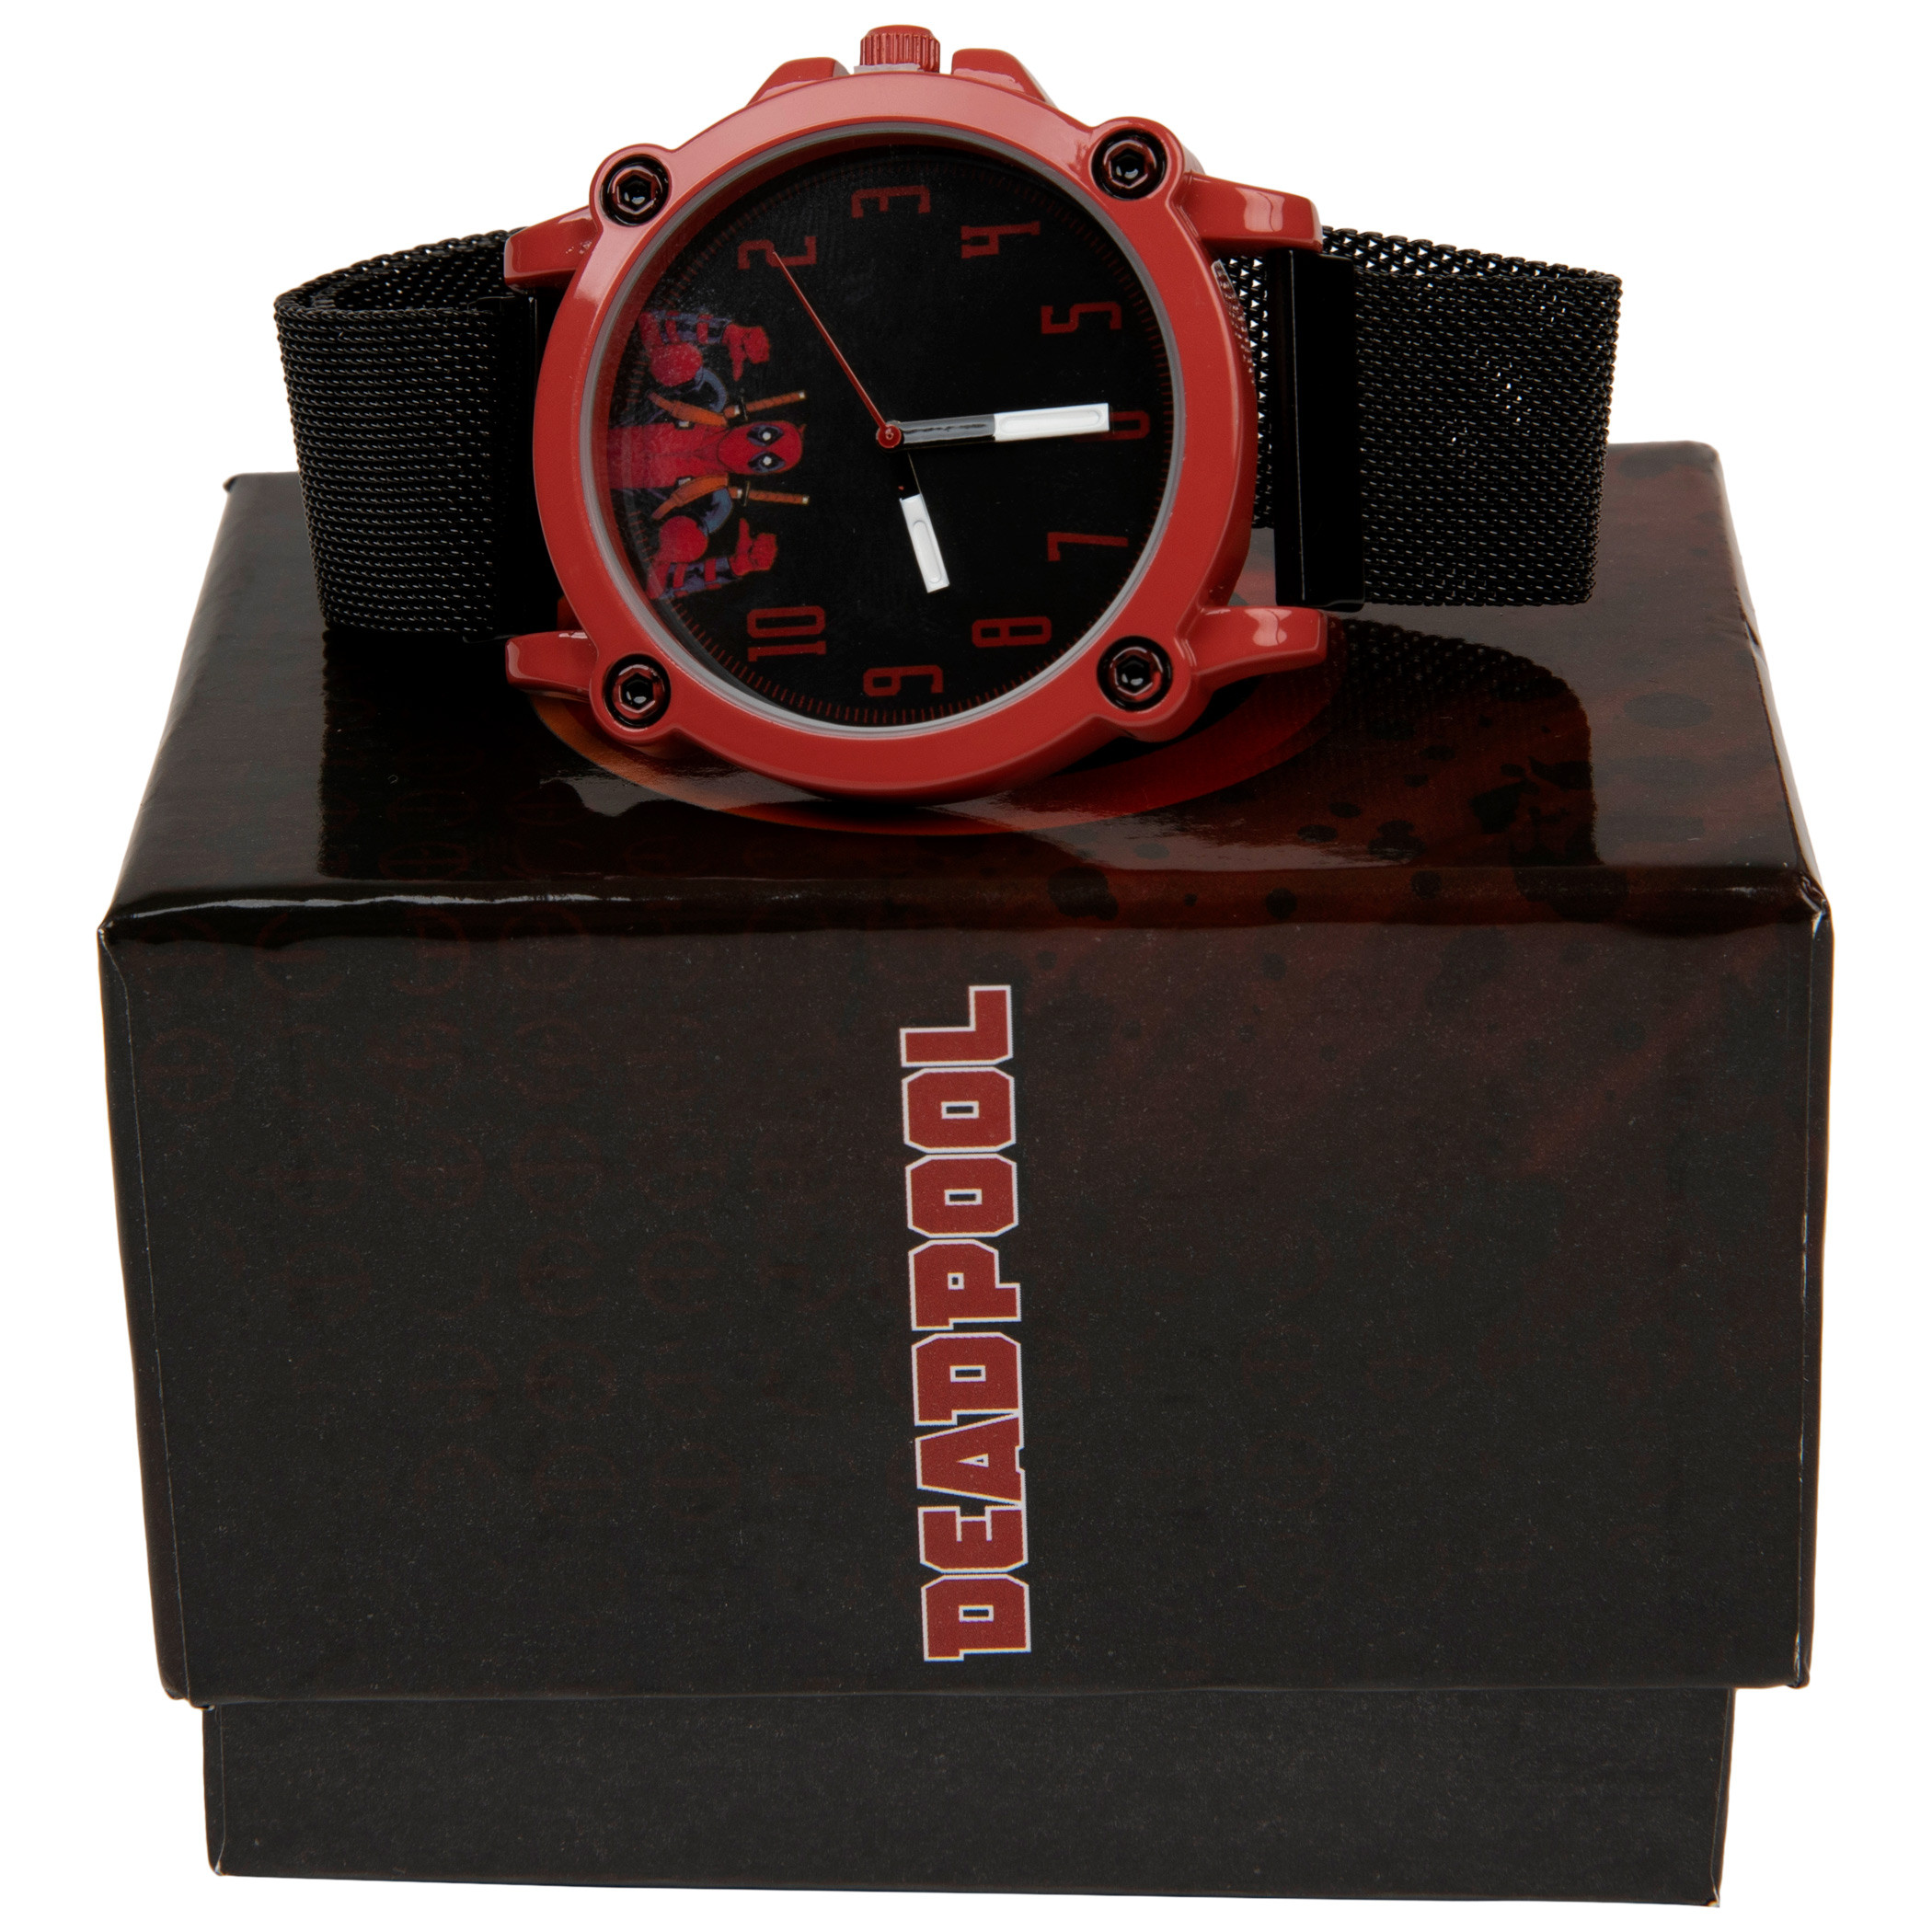 Deadpool 'This Guy' Character Watch